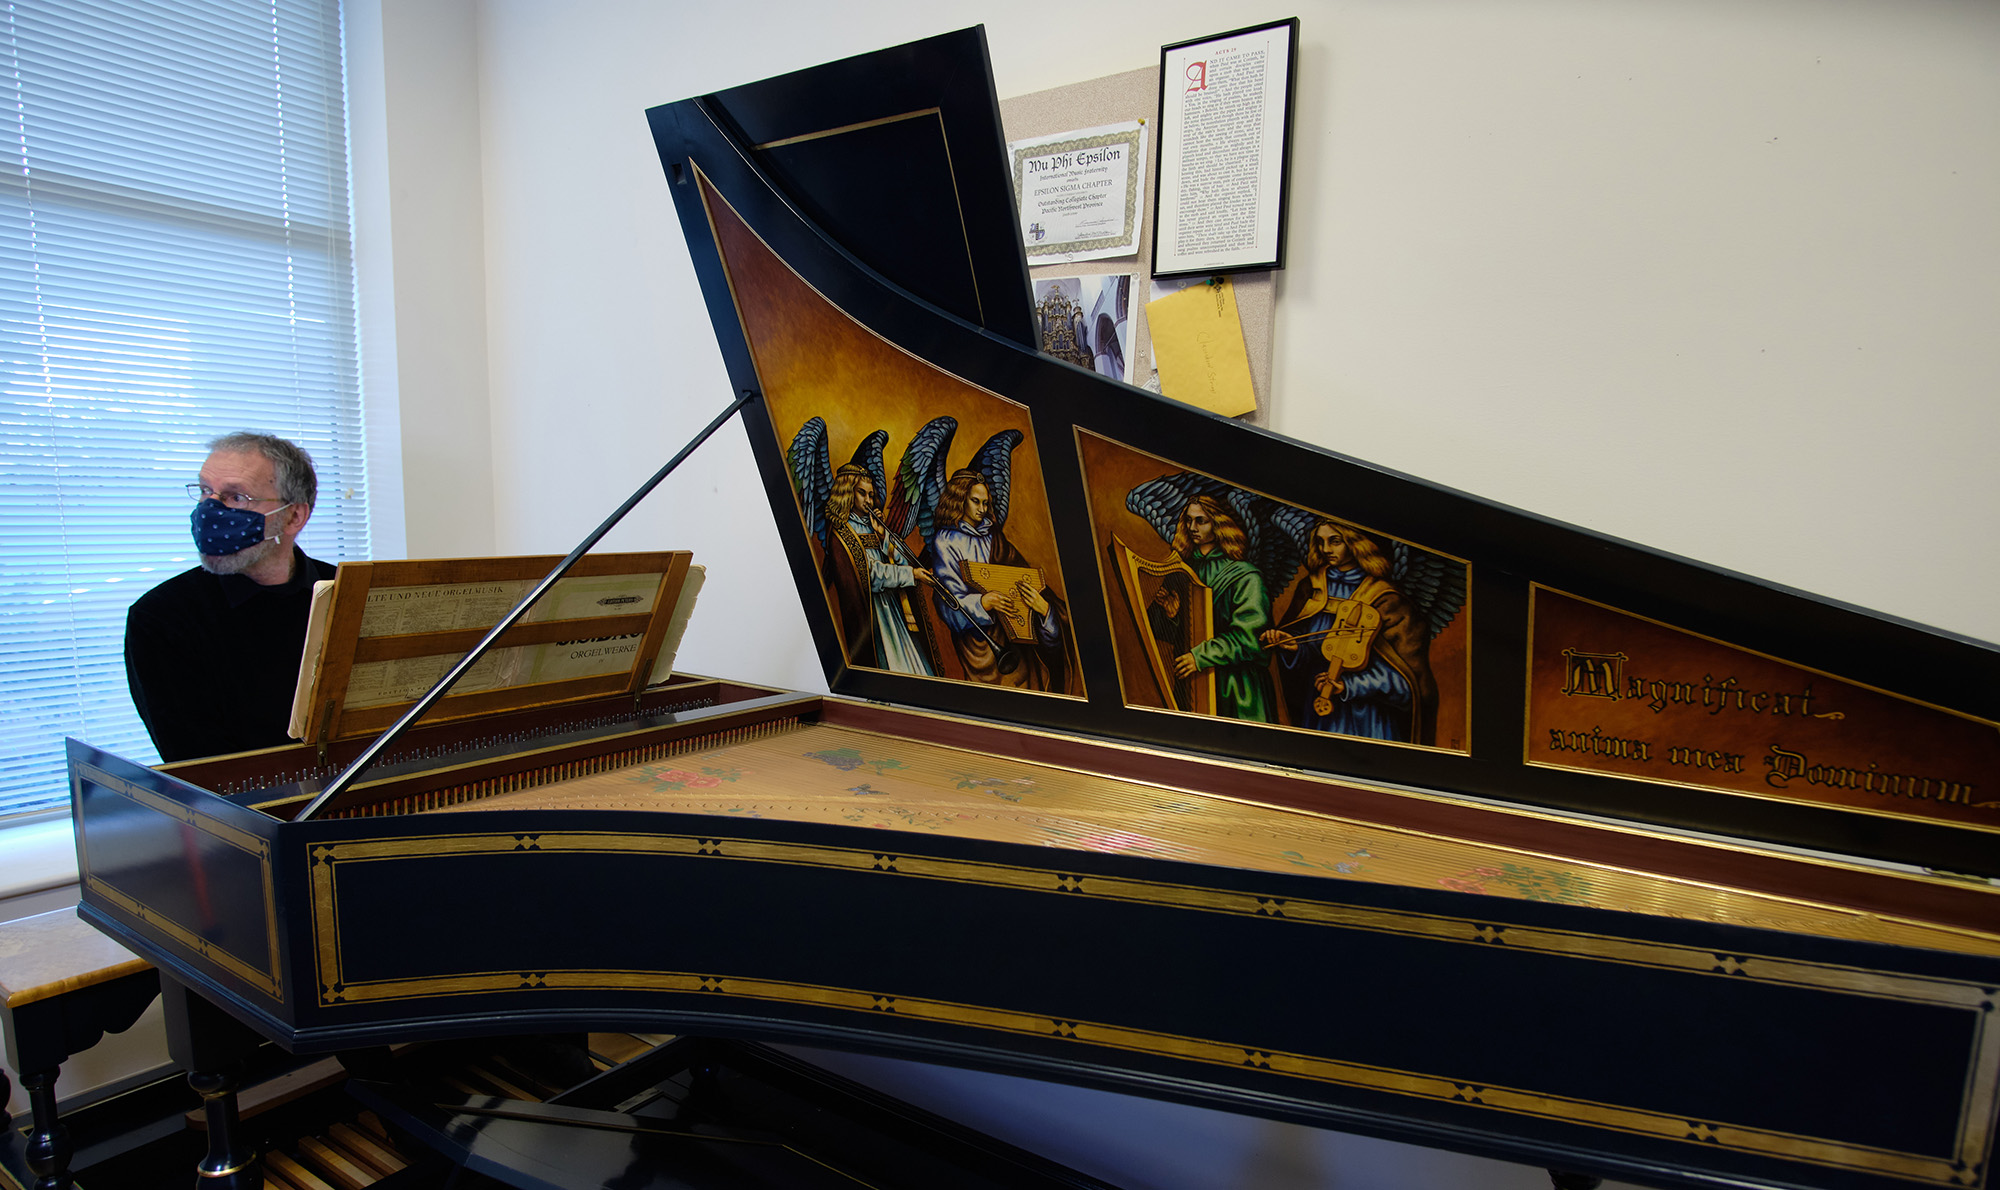 Paul Tegels, organist and Associate Professor of Music Paul Tegels plays the harpsichord donated by the Pilgrim family in his office, Tuesday, Feb. 9, 2021, at PLU. (PLU Photo/John Froschauer)